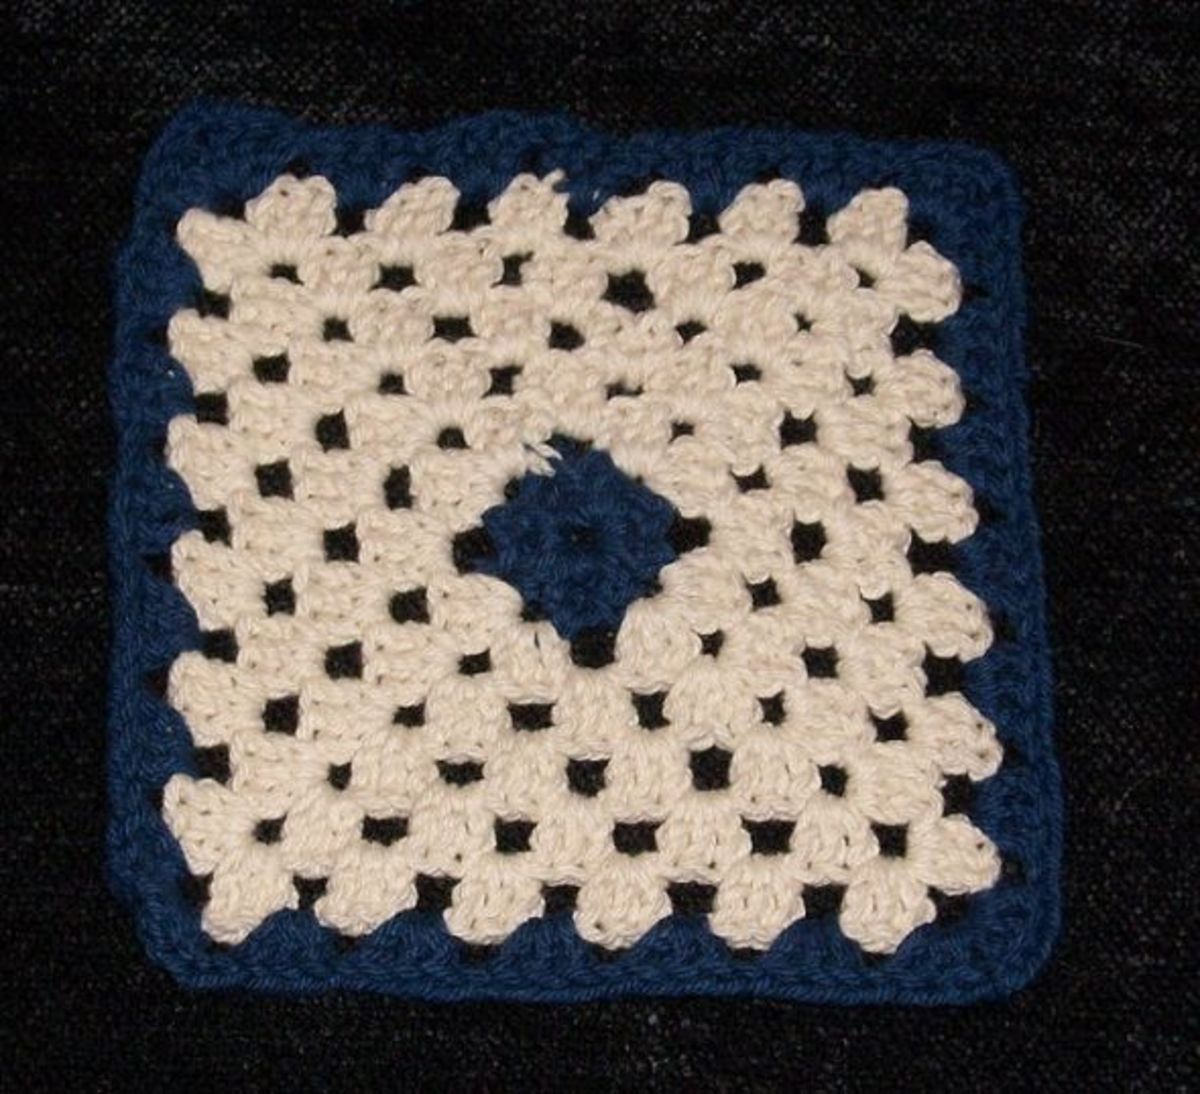 "Granny Square" sample. Attribution: By Durova (Own work) [GFDL (http://www.gnu.org/copyleft/fdl.html) or CC-BY-SA-3.0-2.5-2.0-1.0 (http://creativecommons.org/licenses/by-sa/3.0)], via Wikimedia Commons